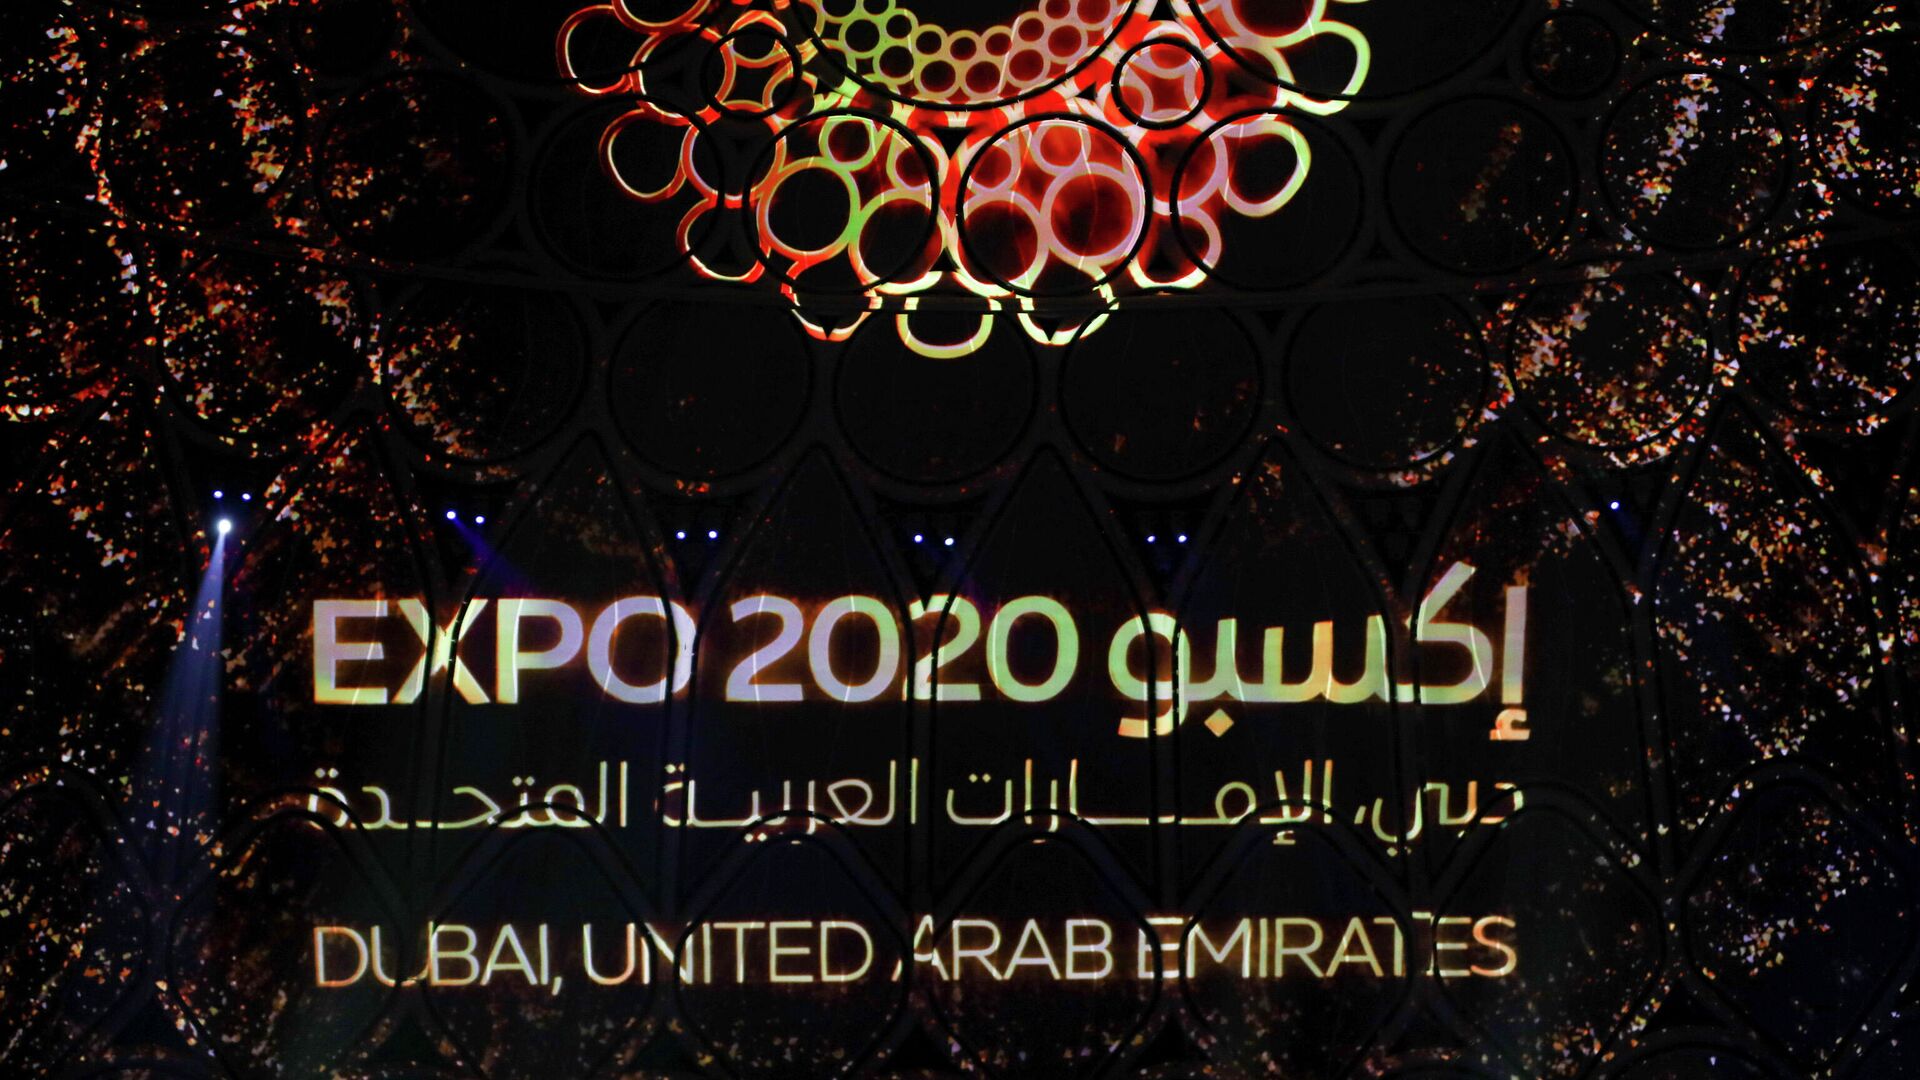 A logo of the Dubai Expo 2020 is pictured during the opening ceremony in Dubai, United Arab Emirates, September 30, 2021. REUTERS/Ahmed Jadallah - Sputnik International, 1920, 02.10.2021